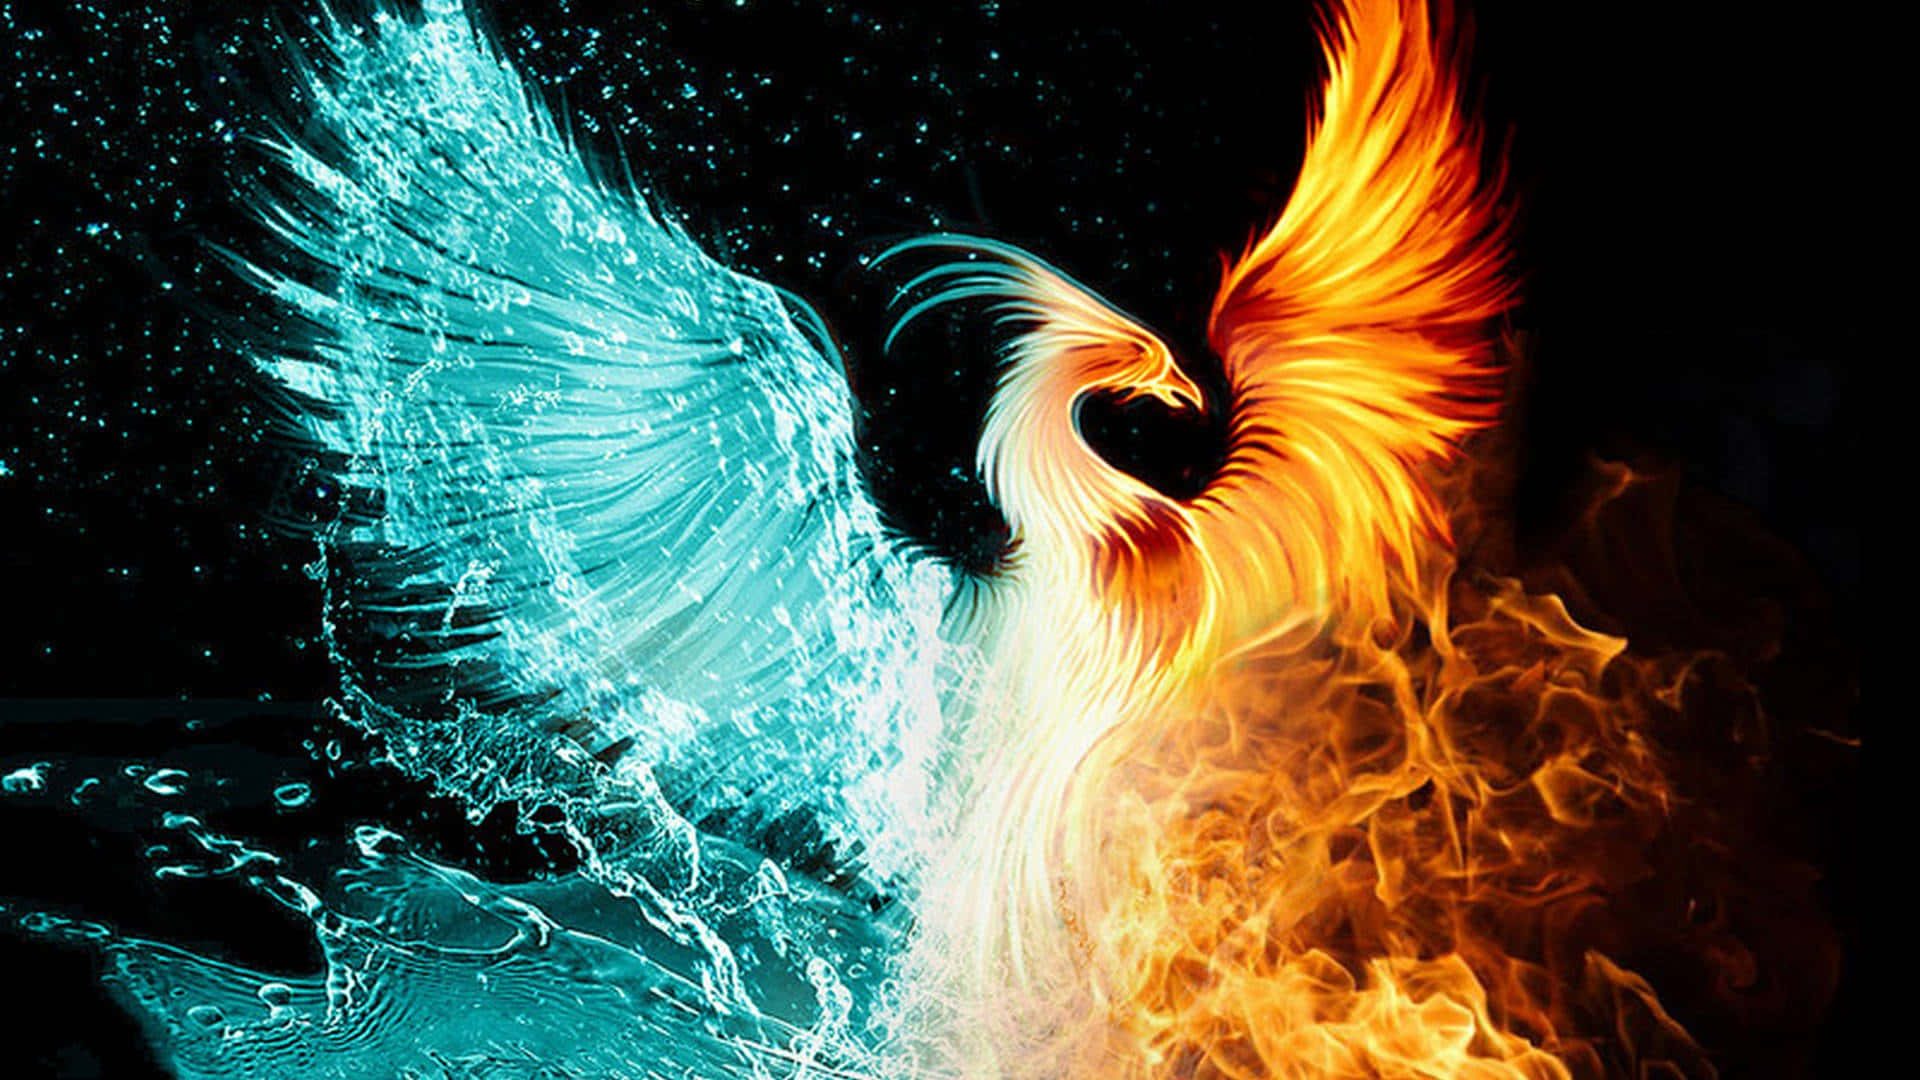 "Fire and Water, Opposing Forces of Nature" Wallpaper